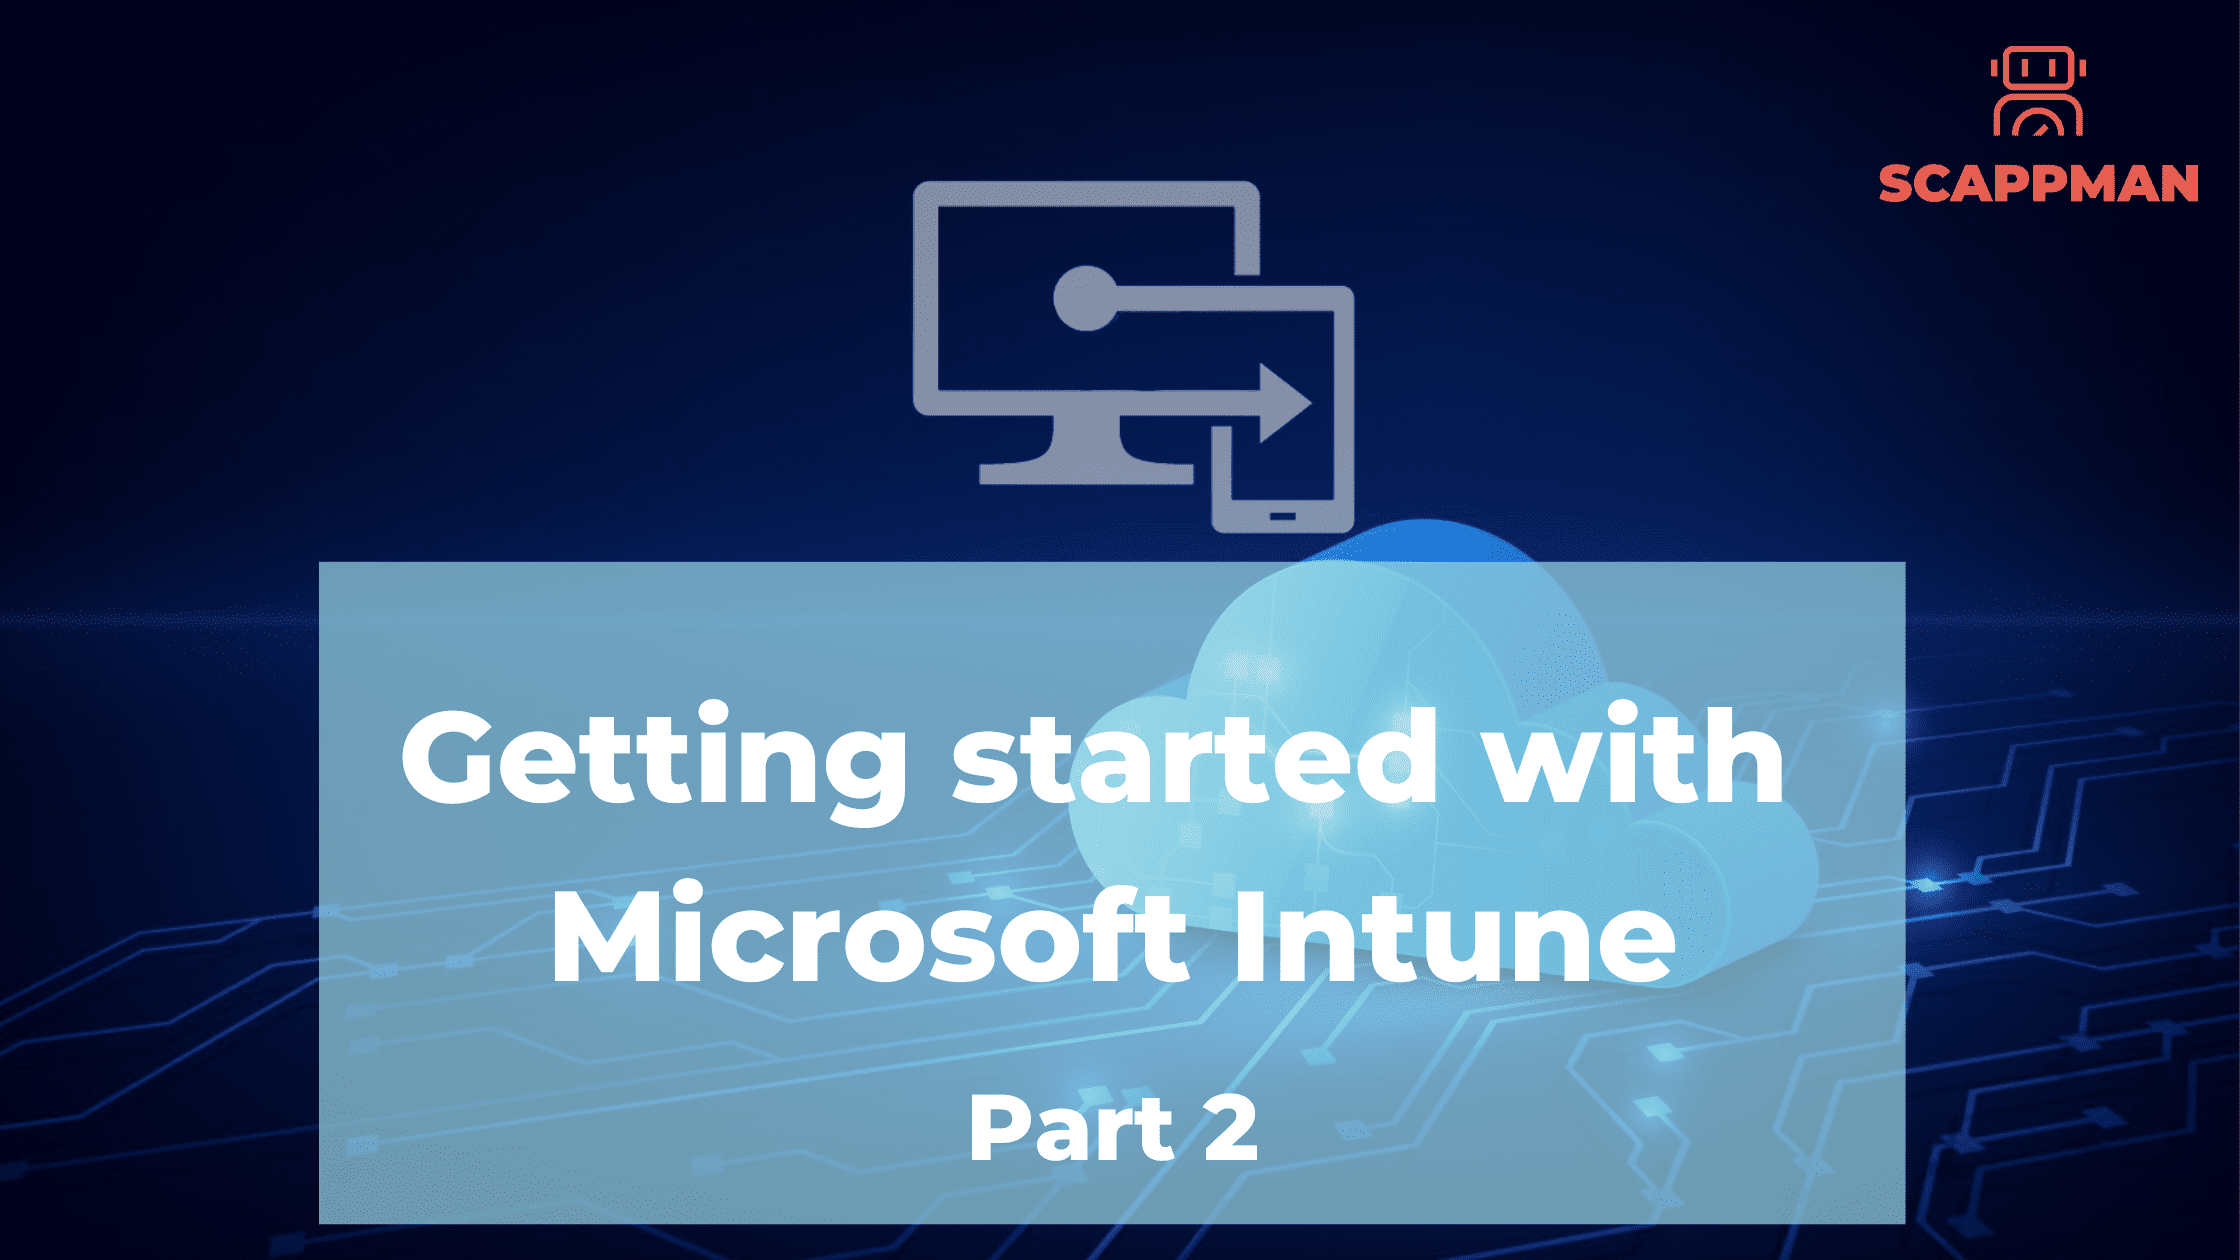 How-to guide: Getting started with Microsoft Intune (part 2)